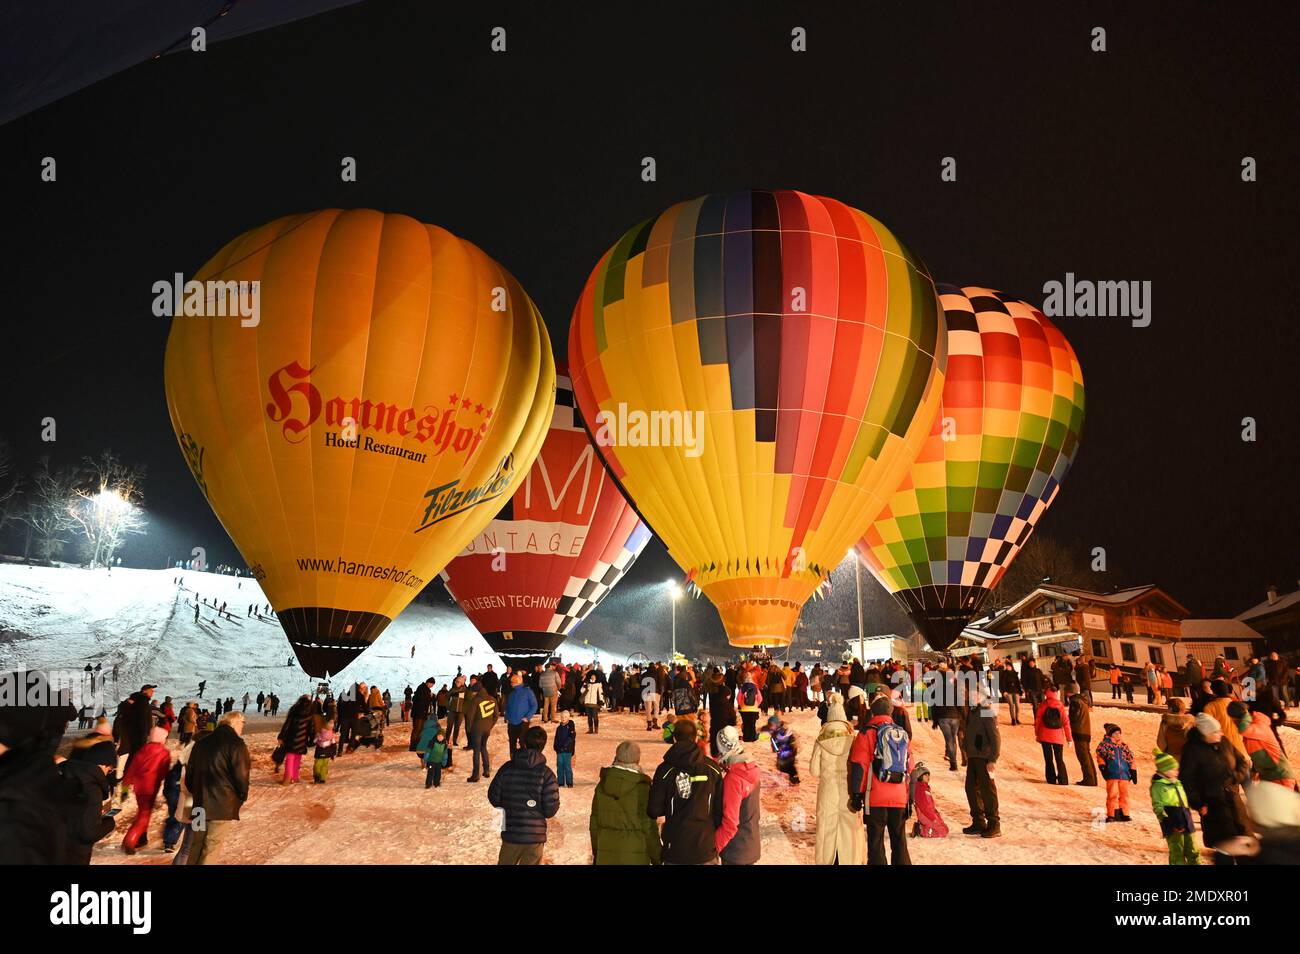 At the night of the balloons, the balloonists fire their balloons on the ground and create a colorful spectacle Stock Photo